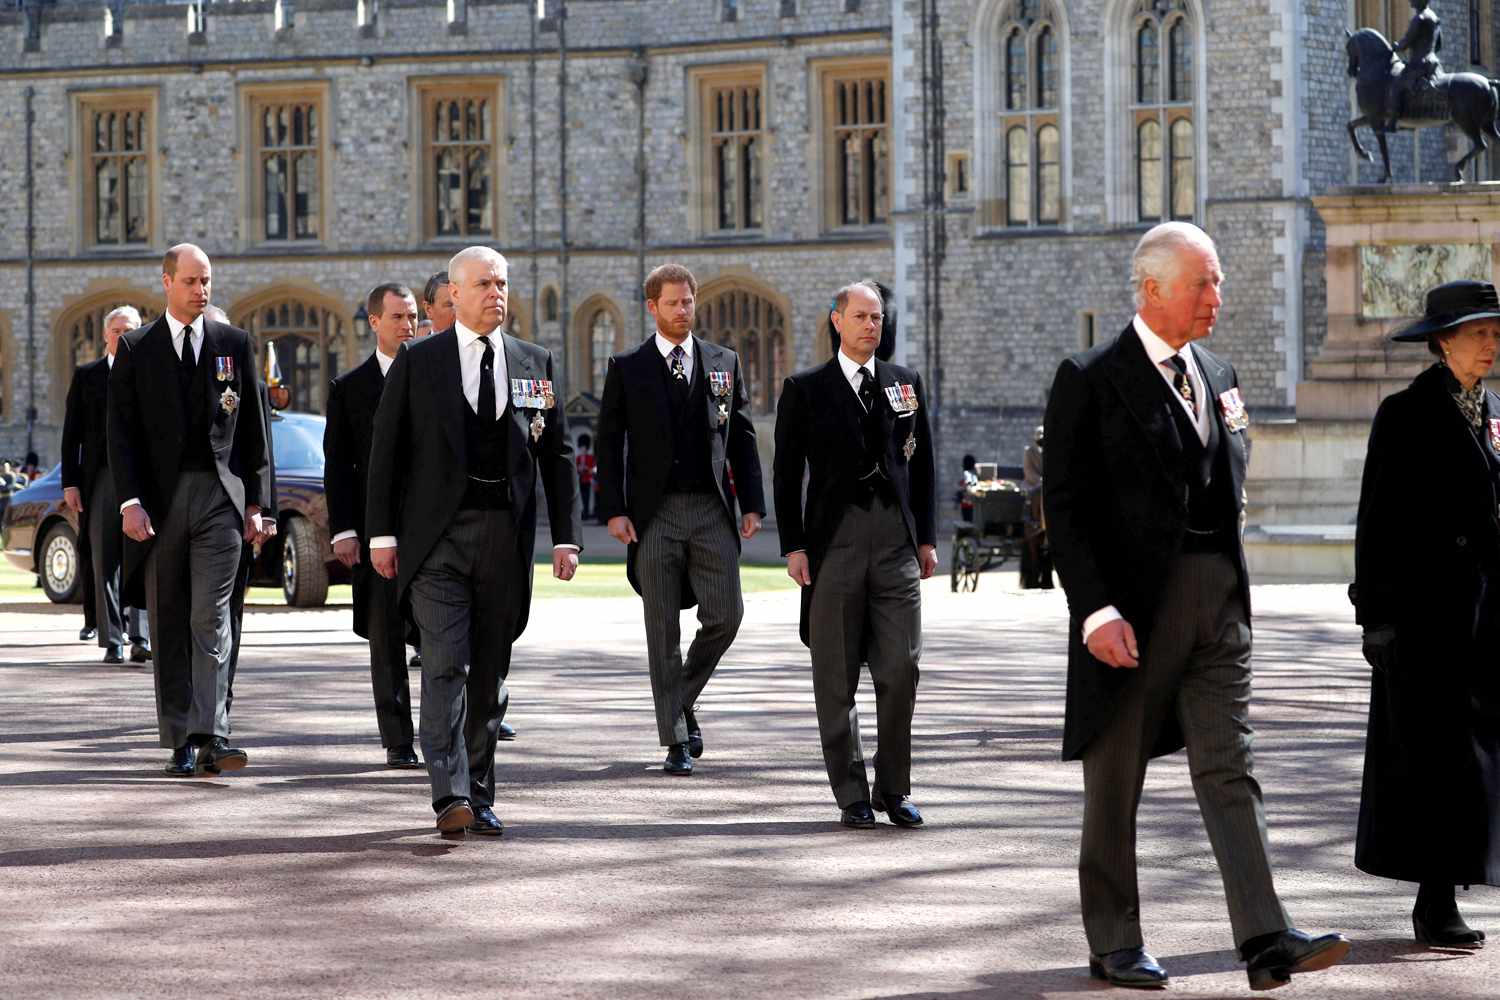 Philip prince funeral of Prince Philip